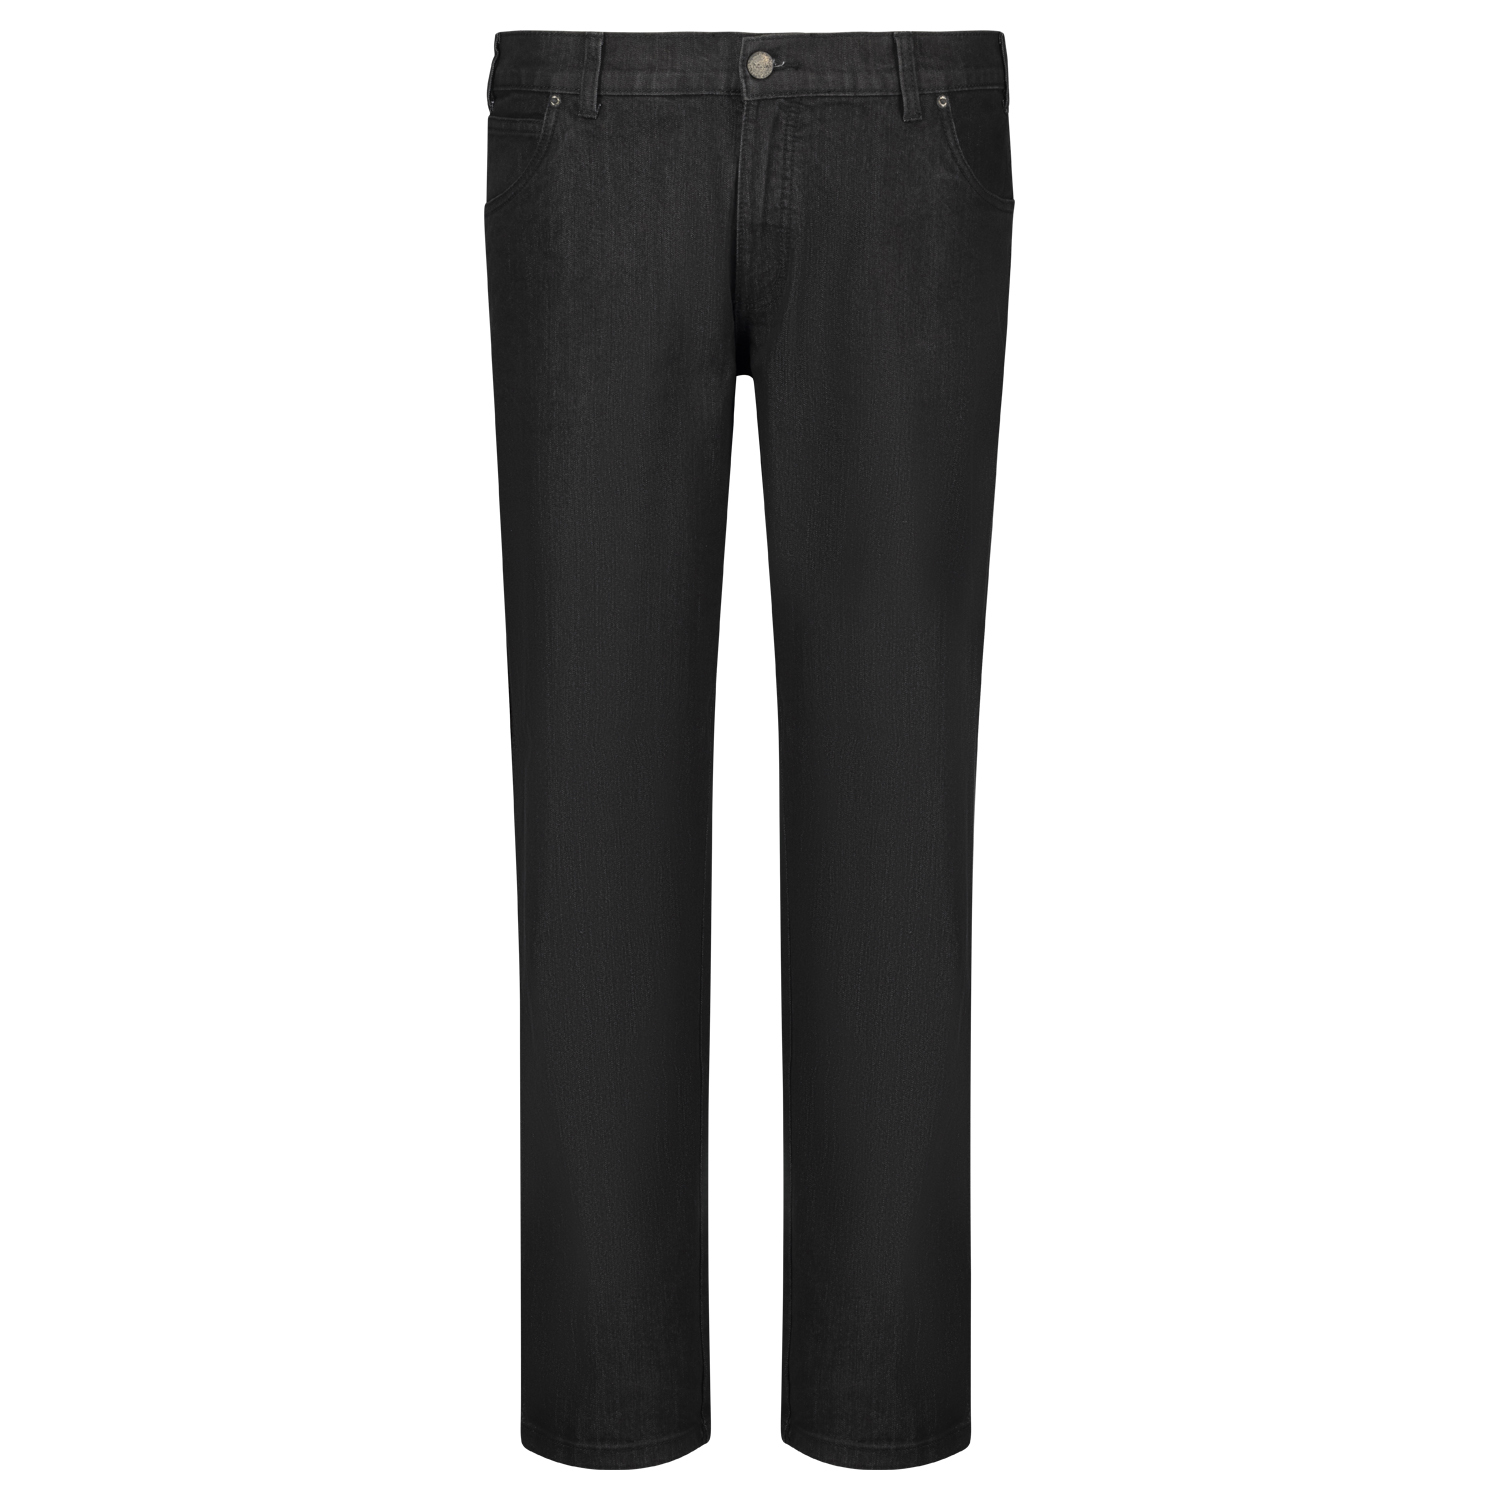 Black stone washed Jeans for men by North 56°4 in oversizes up to 70/34